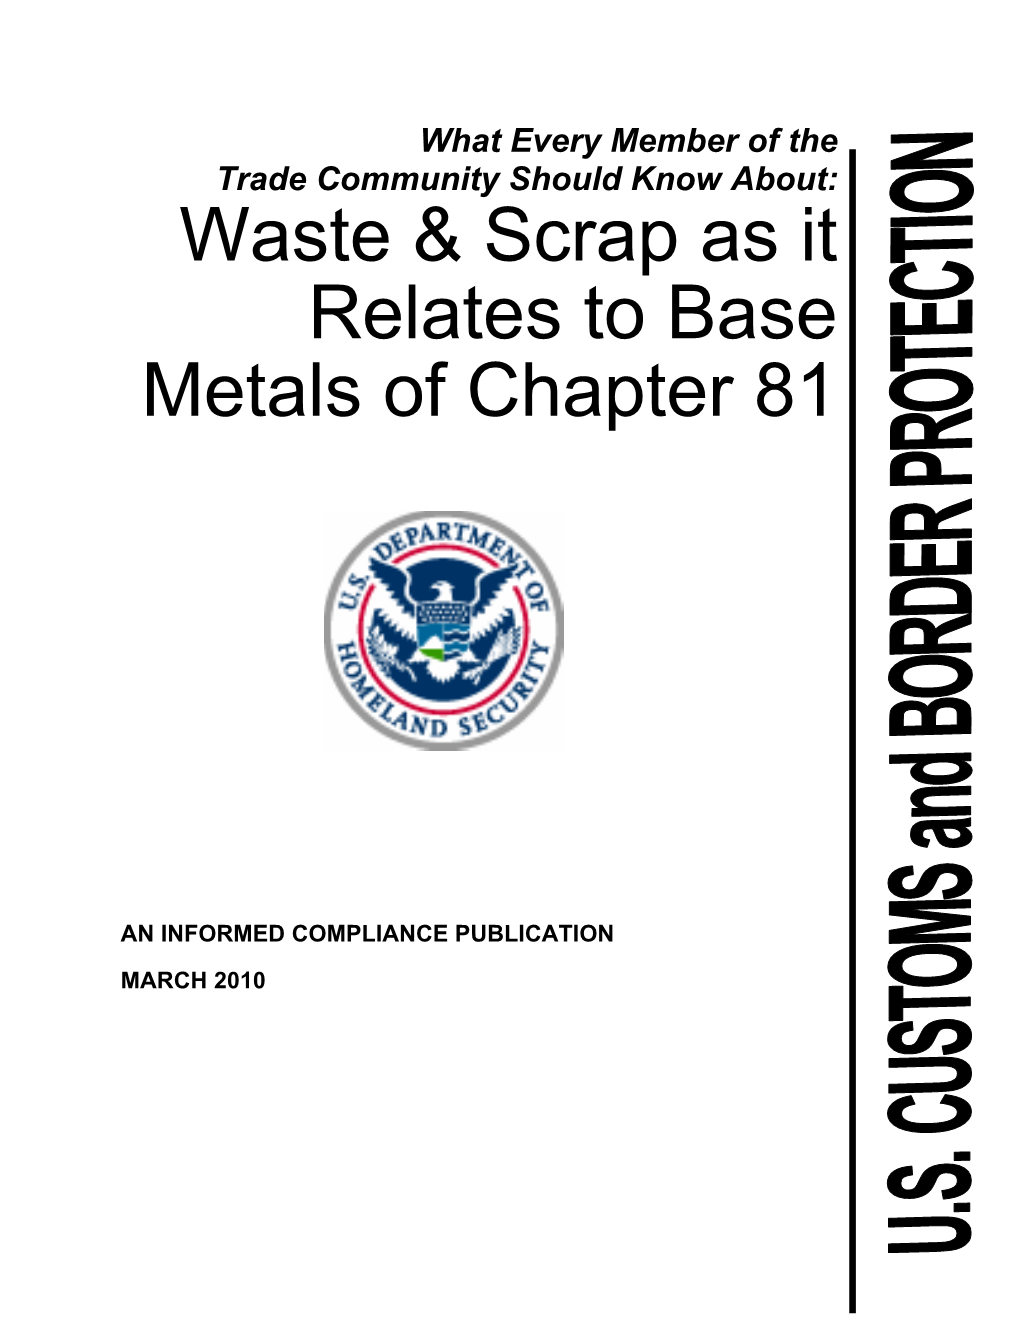 Waste & Scrap As It Relates to Base Metals of Chapter 81